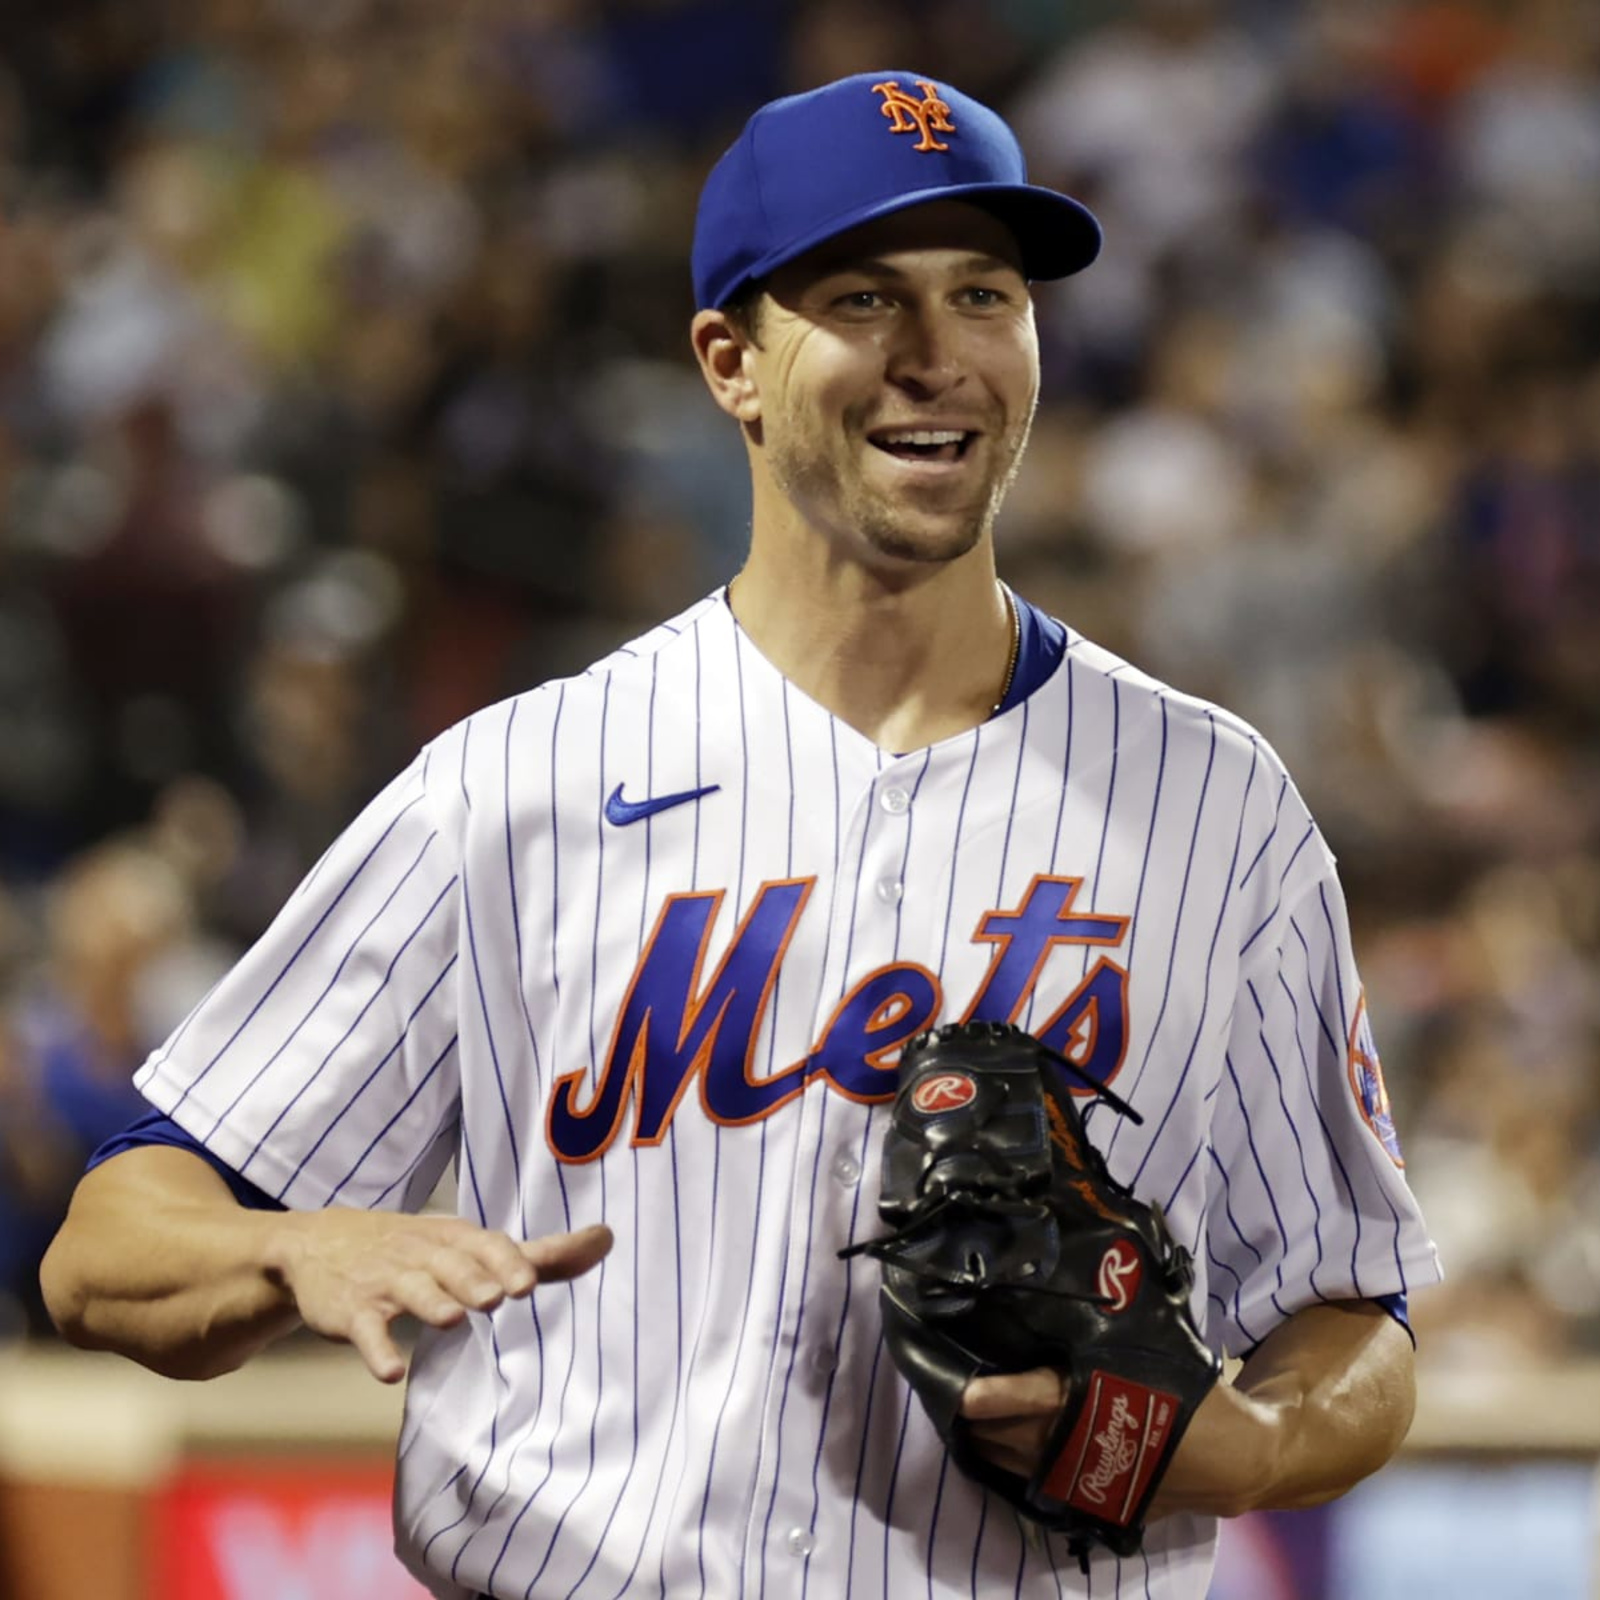 Mets need more depth depth beyond deGrom, Nimmo to succeed